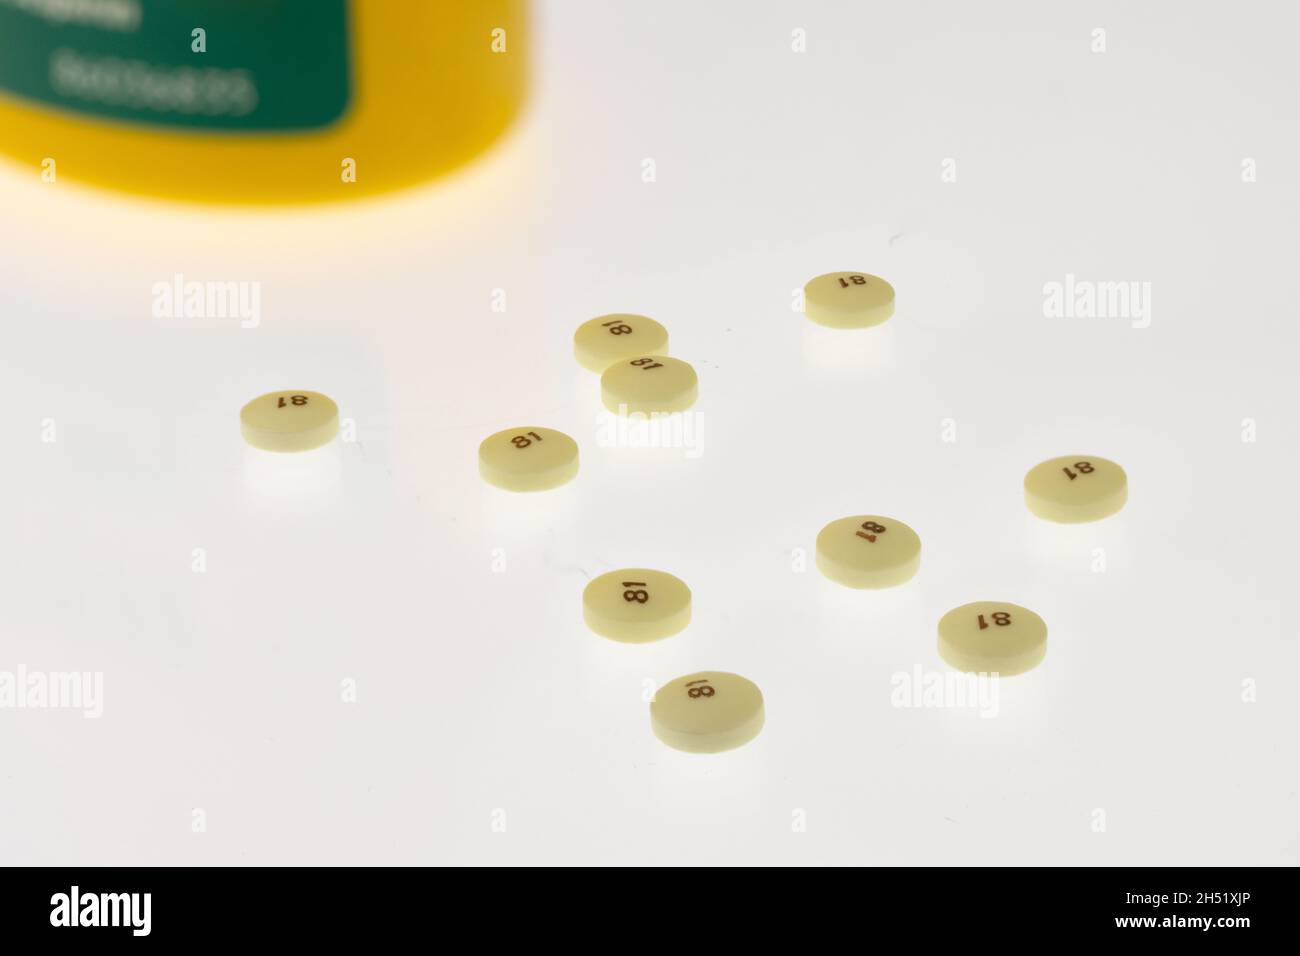 scattered low dose 81 milligrams aspirin on a white background with a yellow and green bottle in background, commonly used as a preventive medicine fo Stock Photo